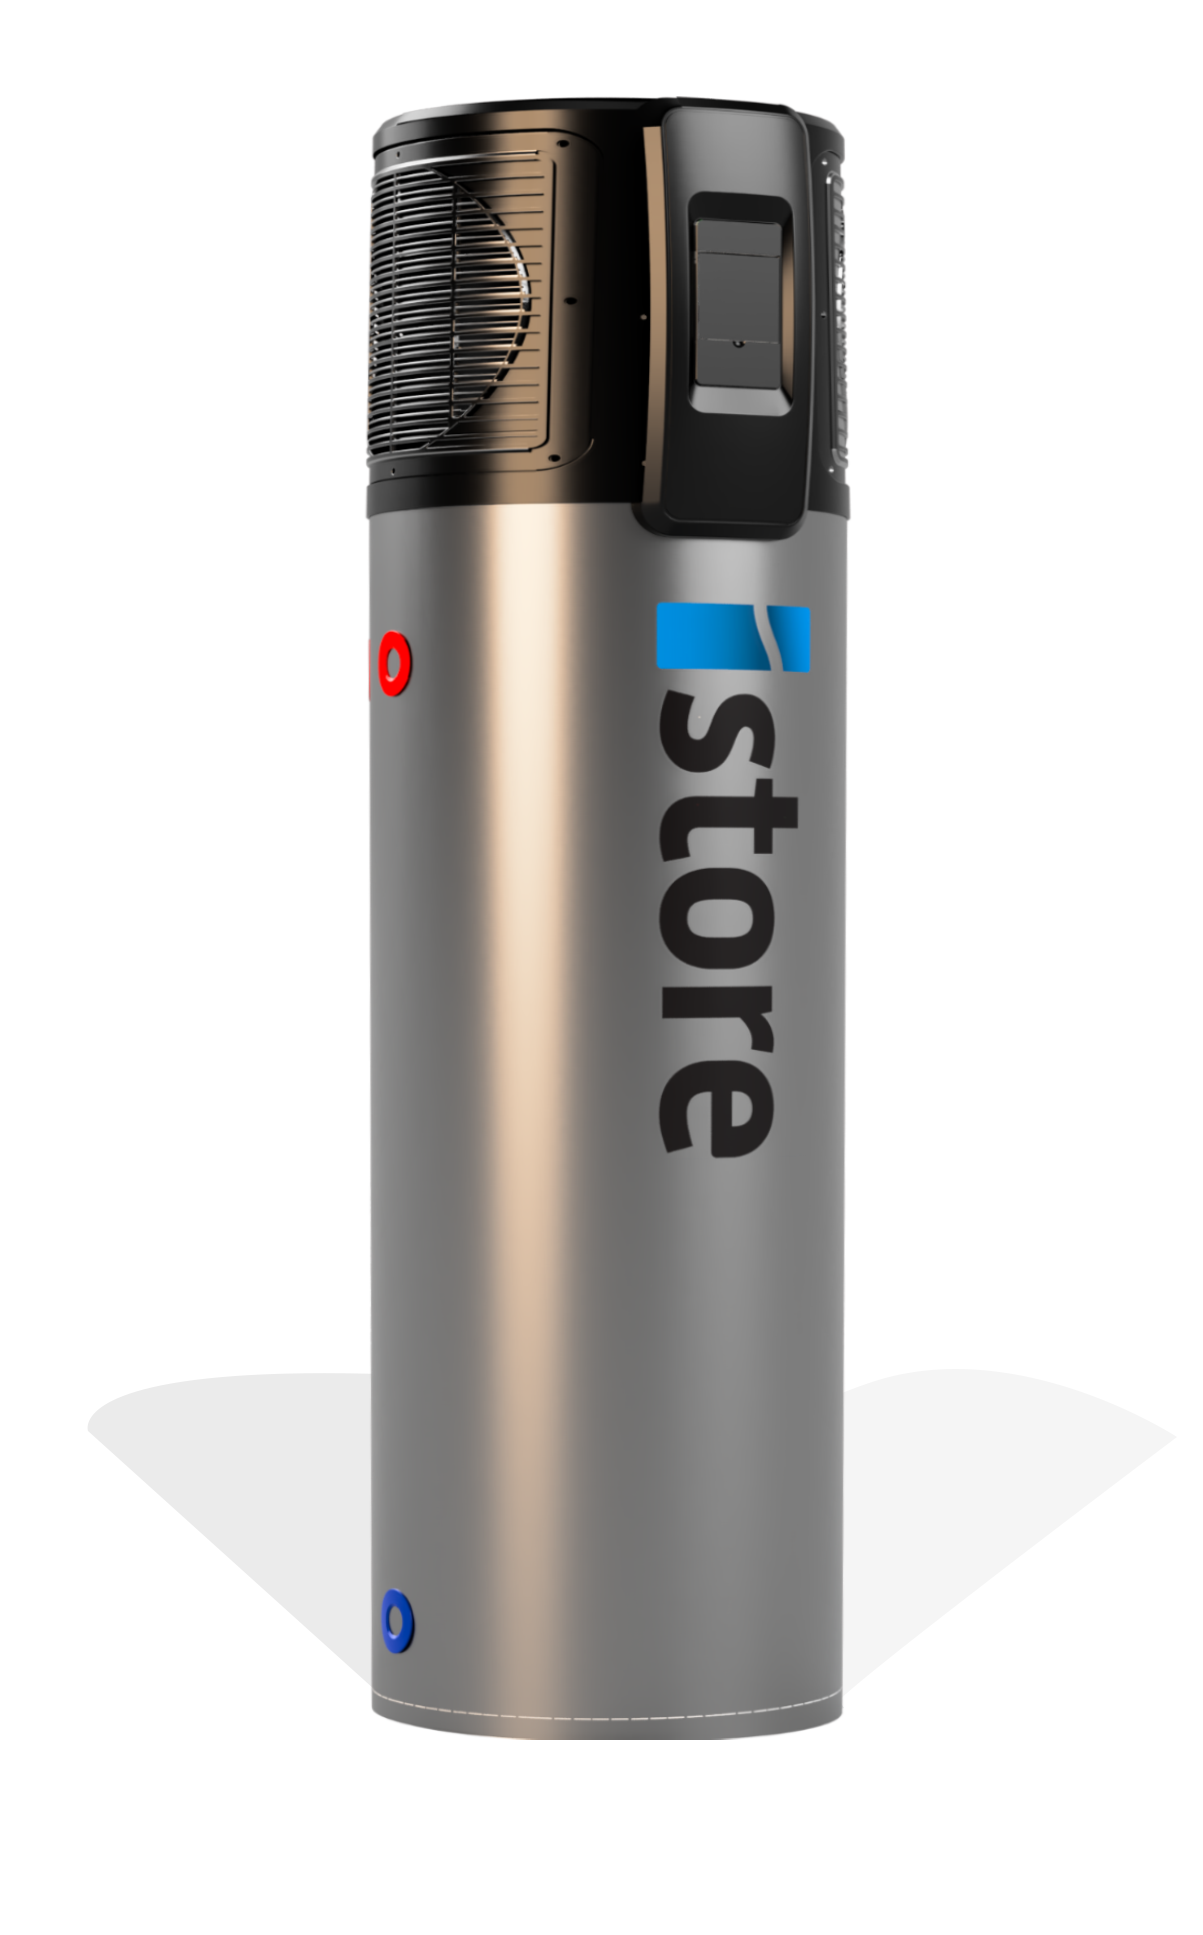 istore-180l-hot-water-system-hot-water-solutions